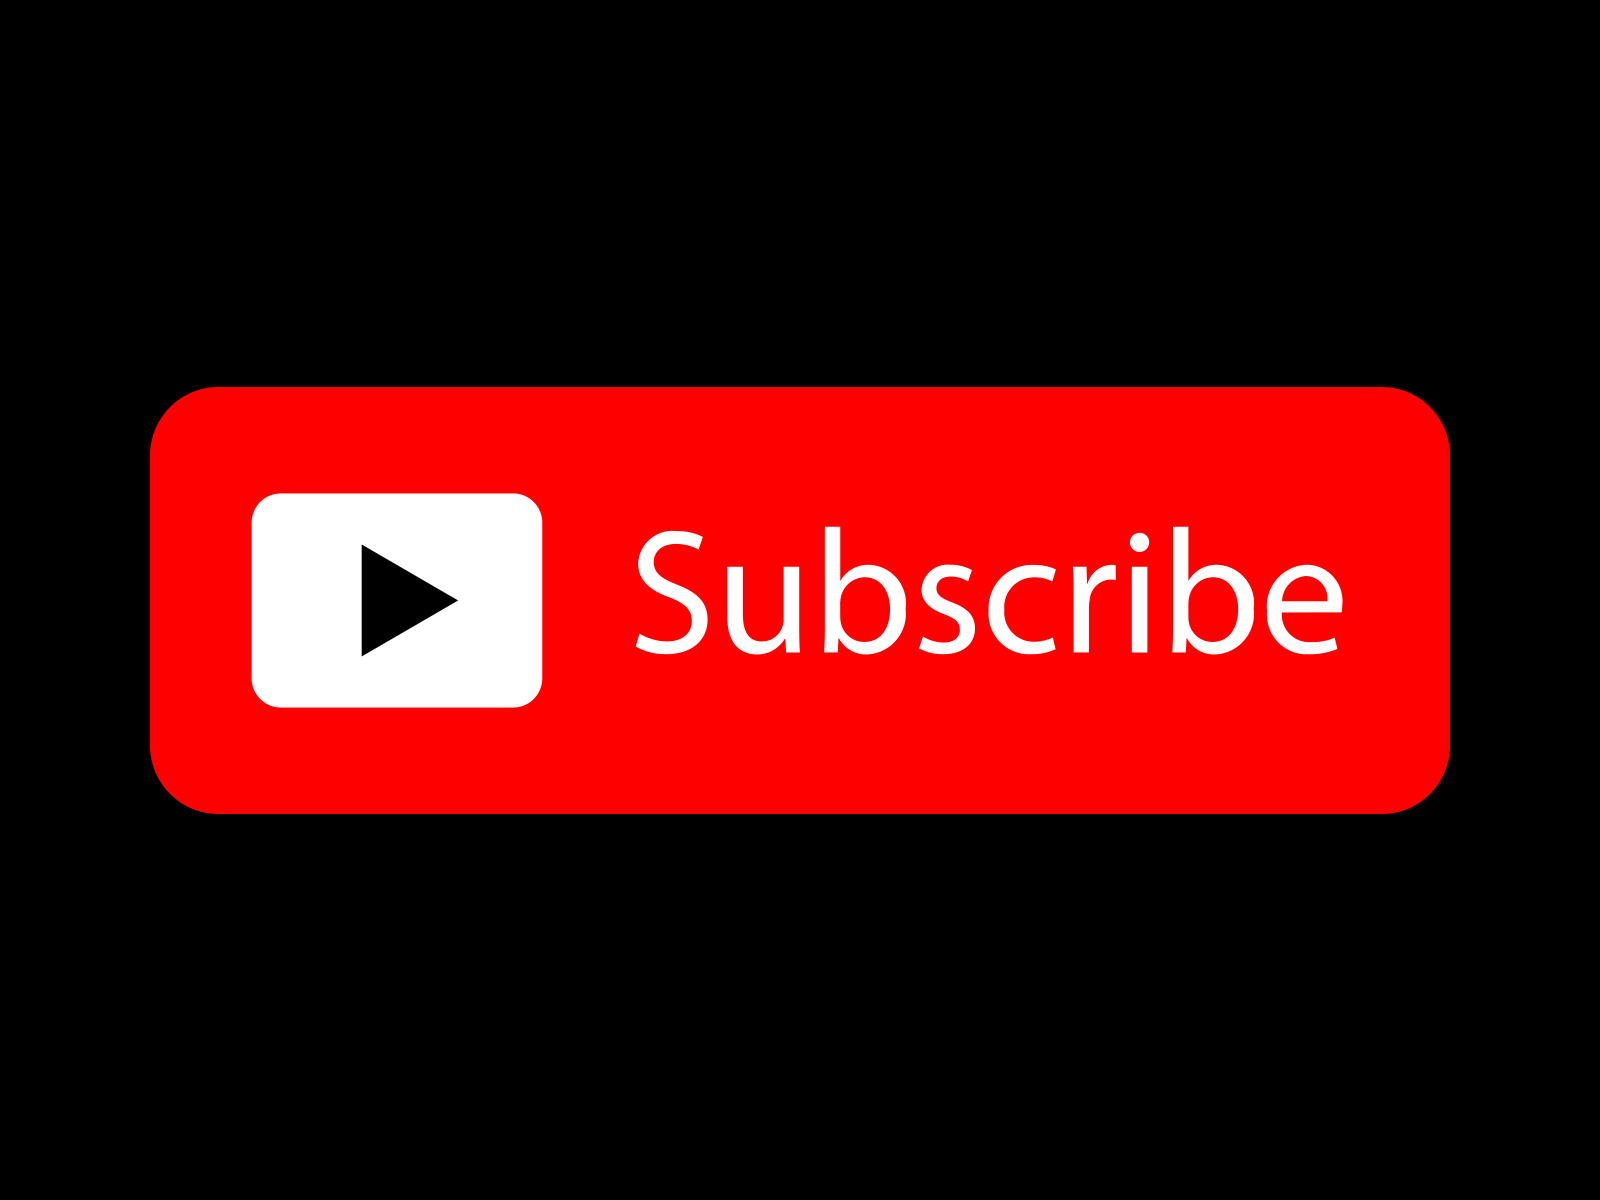 Free-Red-YouTube-Subscribe-Button-Icon-By-AlfredoCreates-7